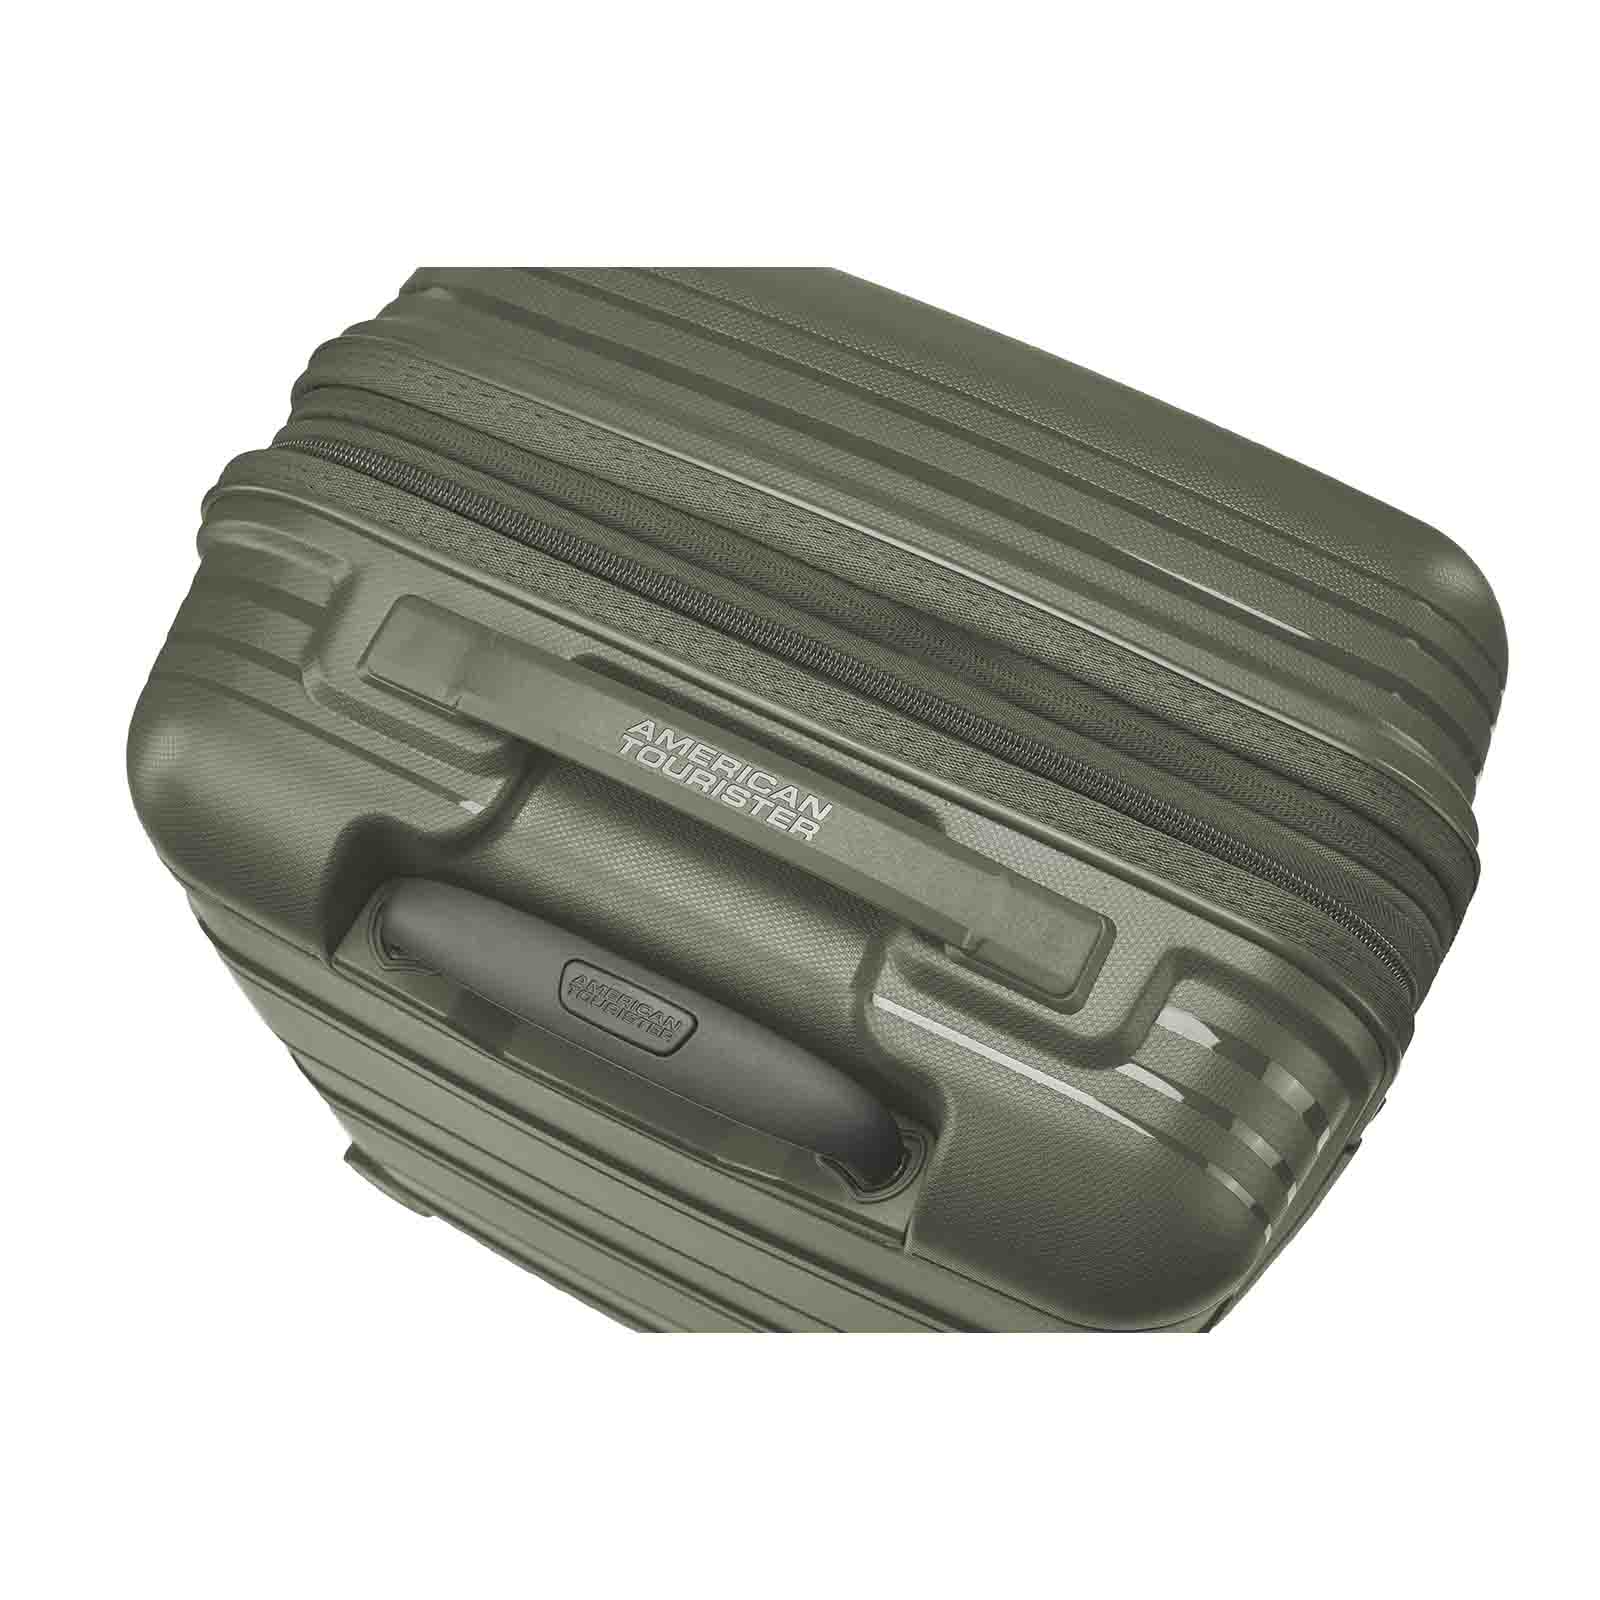 American-Tourister-Light-Max-55cm-Carry-On-Suitcase-Khaki-Handle